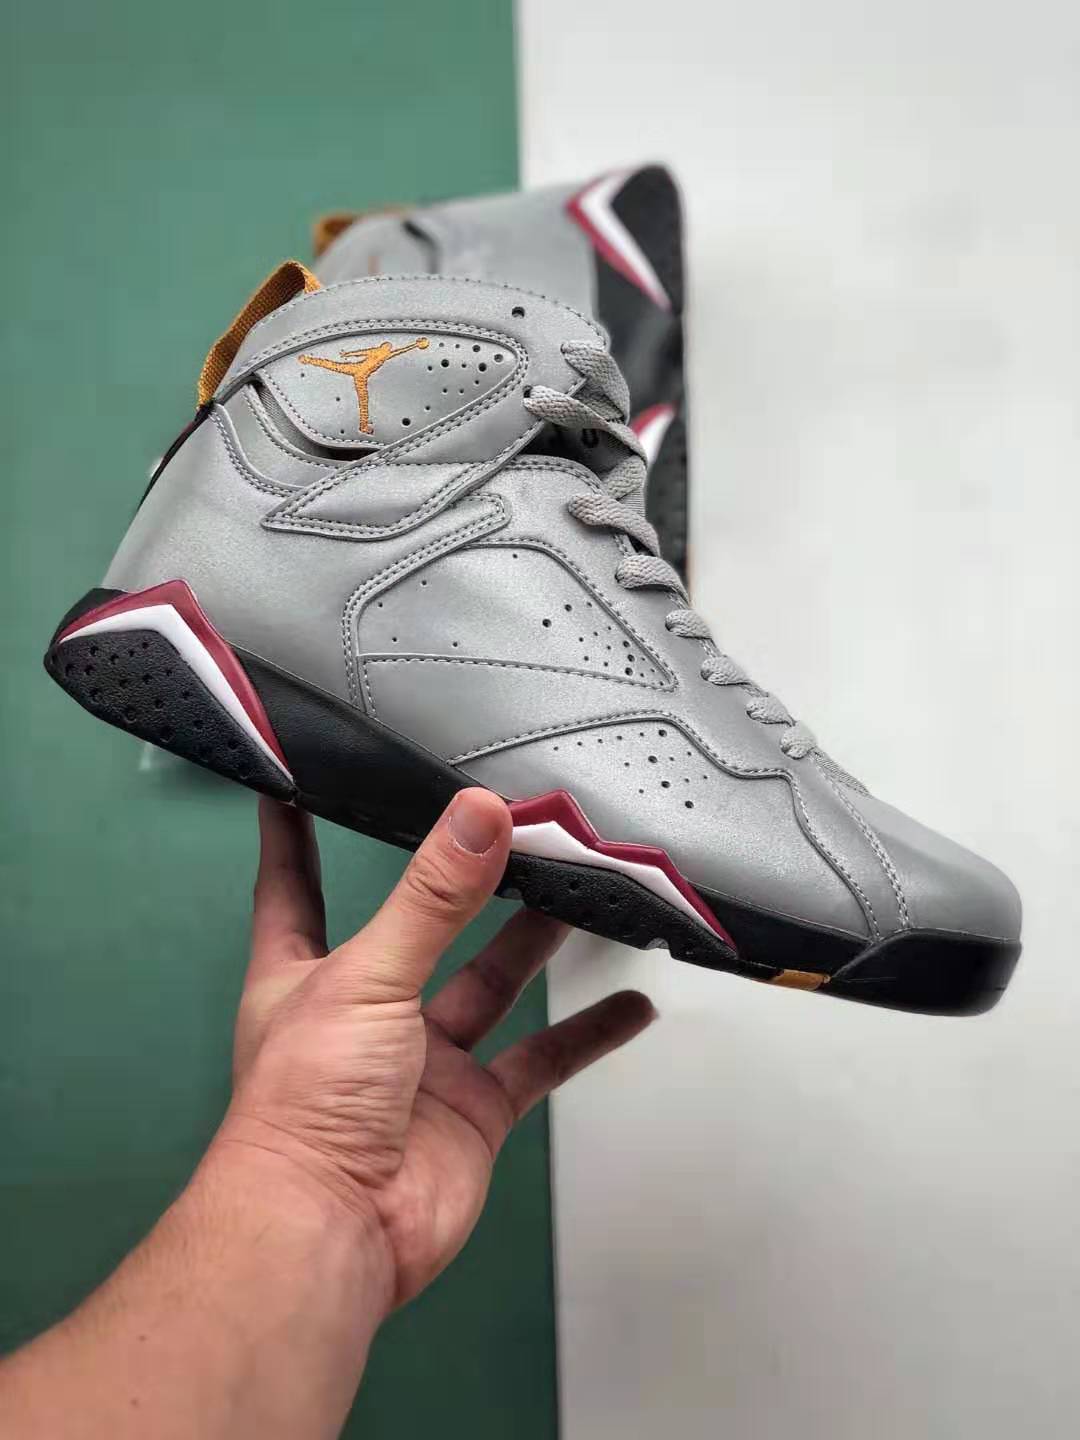 Air Jordan 7 Retro SP 'Reflections Of A Champion' BV6281-006 - Iconic Style with Reflective Detailing!